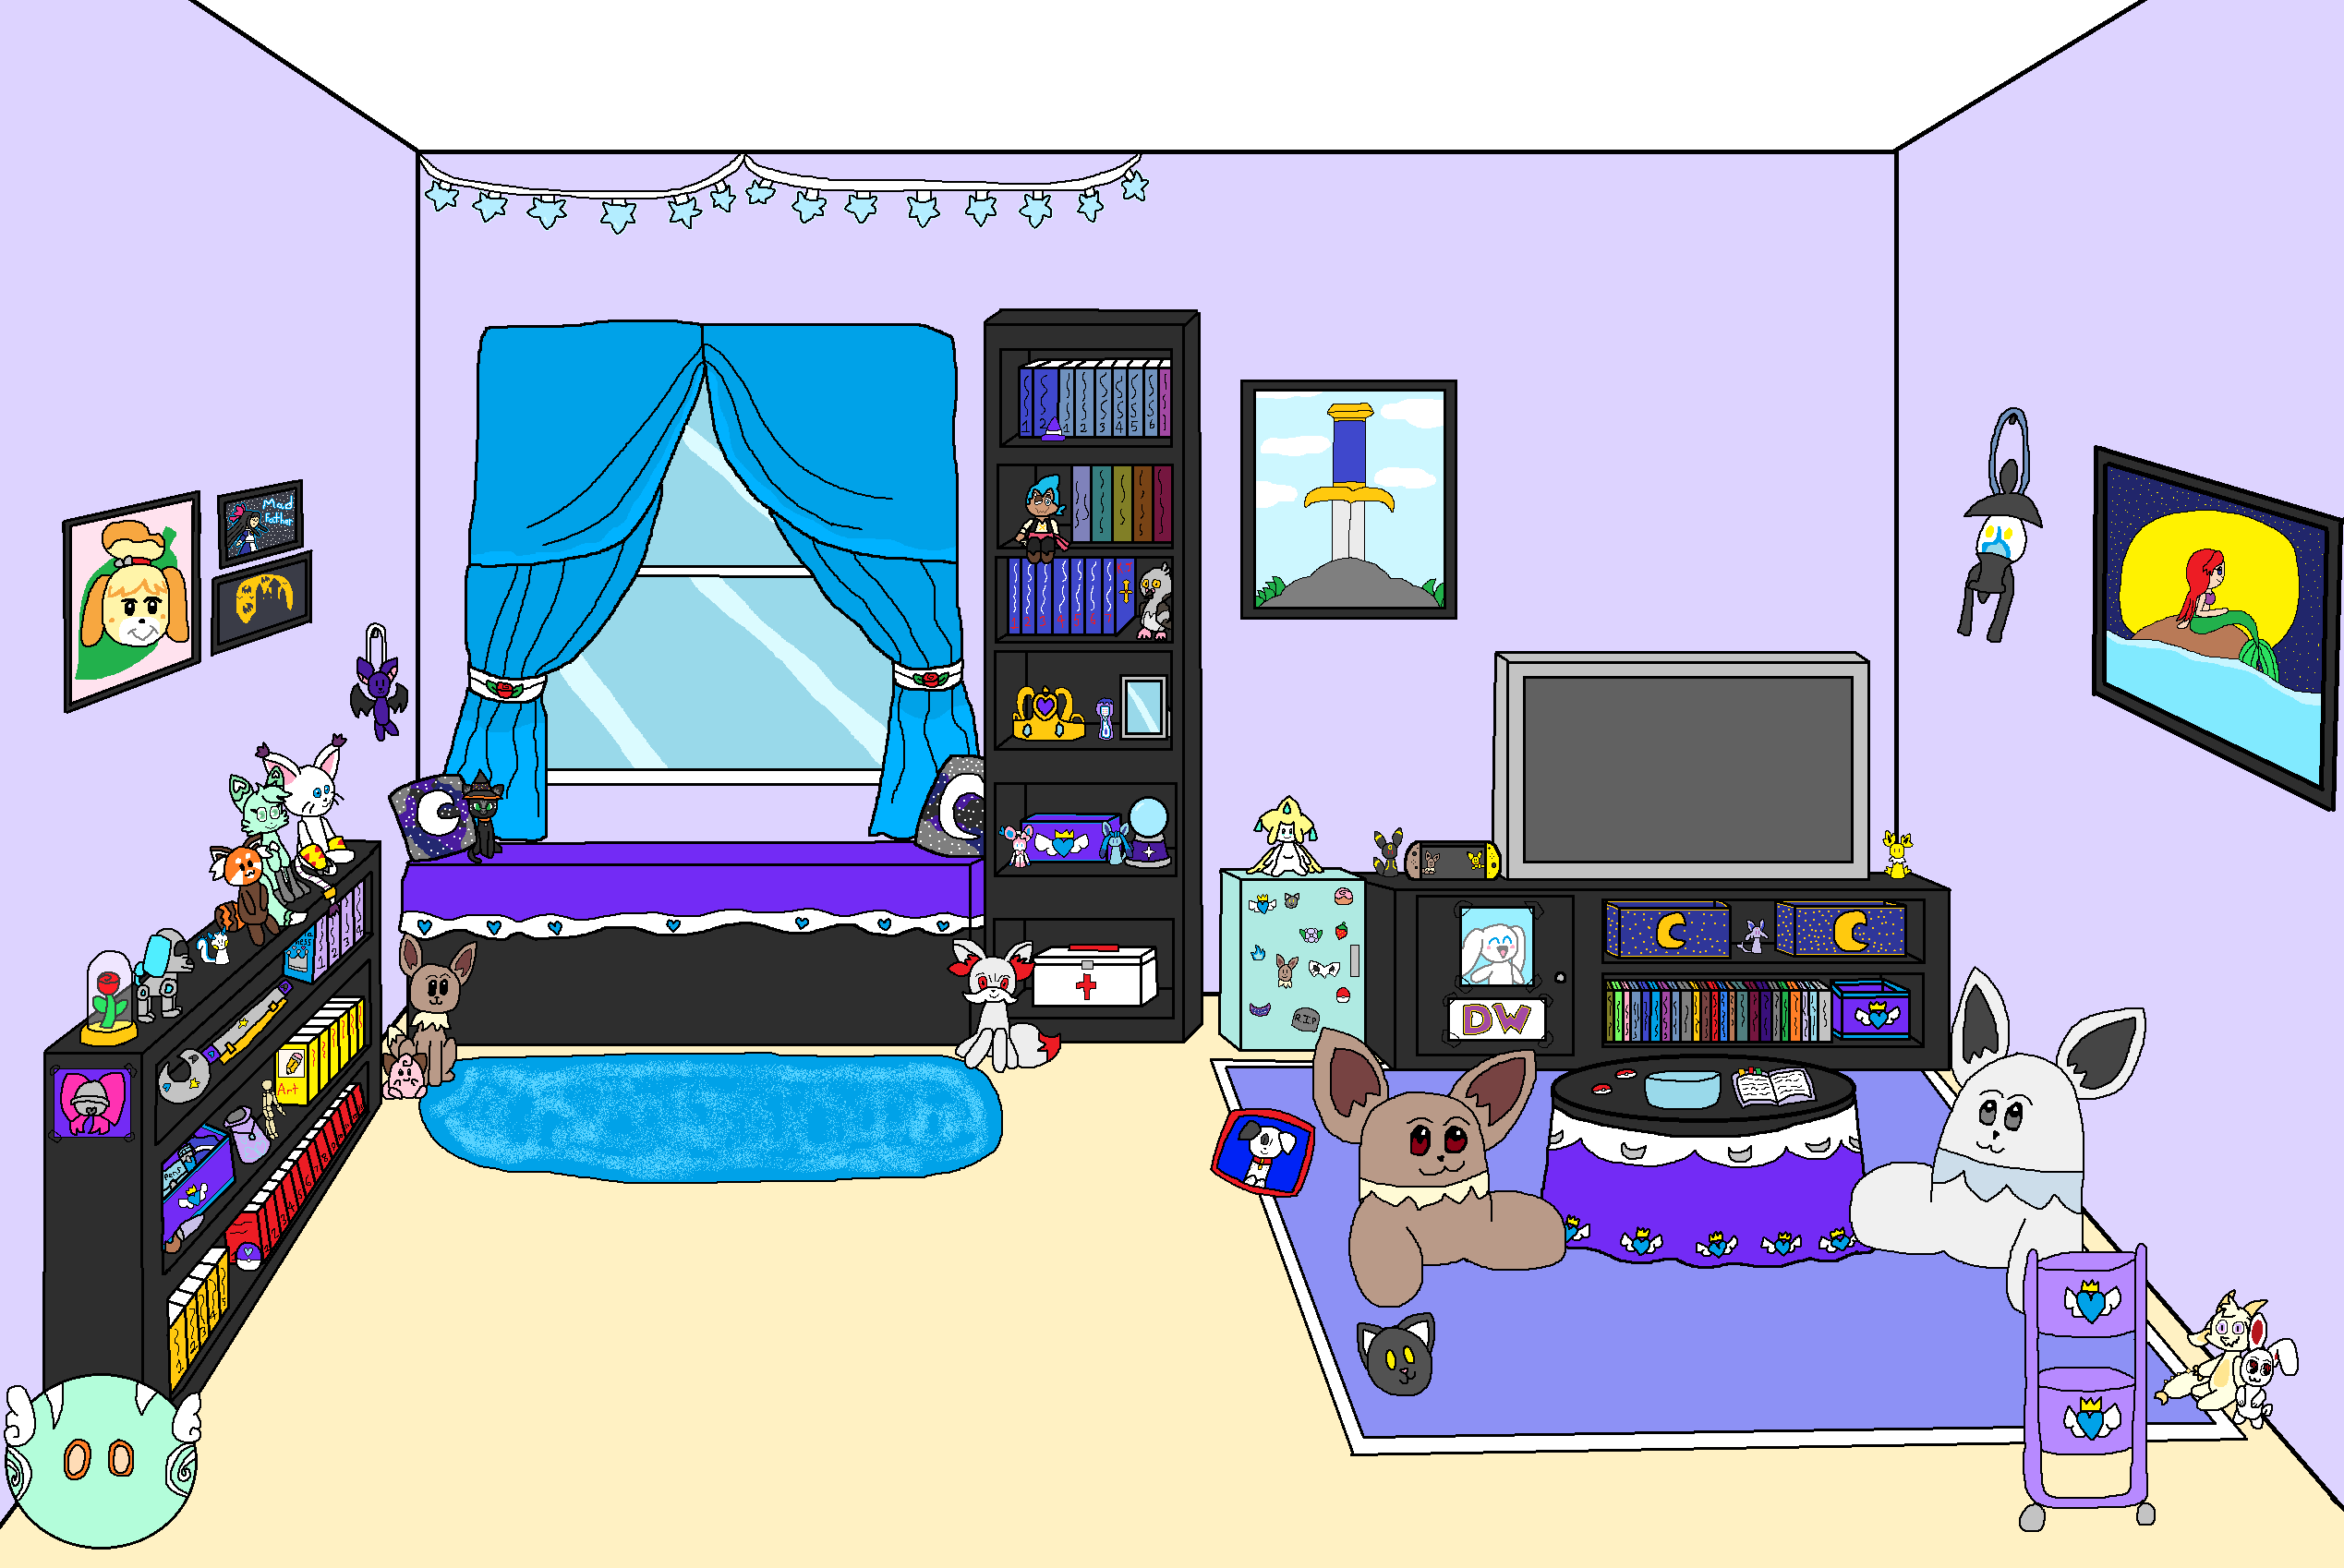 Wing's Bedroom part 2 by angelthewingedcat on DeviantArt